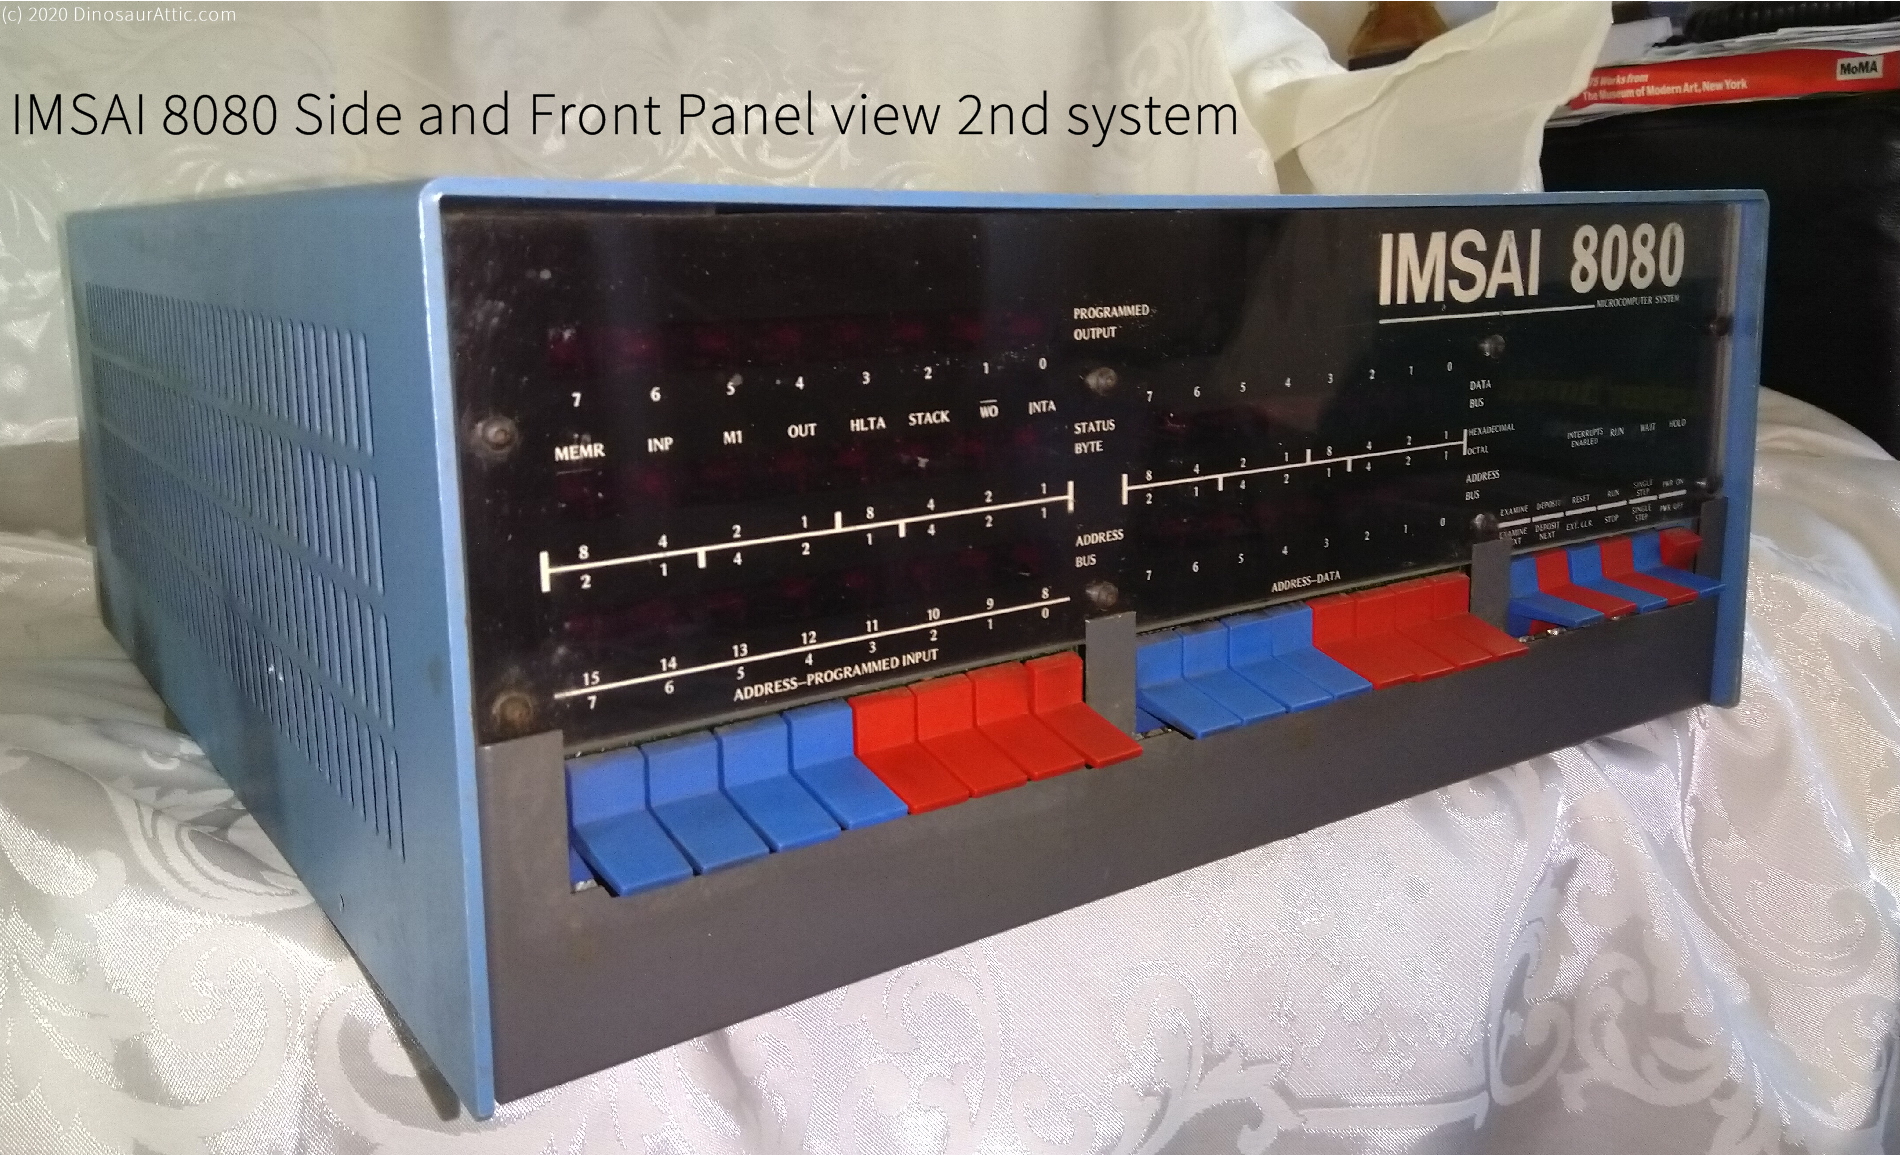 IMSAI 8080 Side and Front Panel view 2nd system